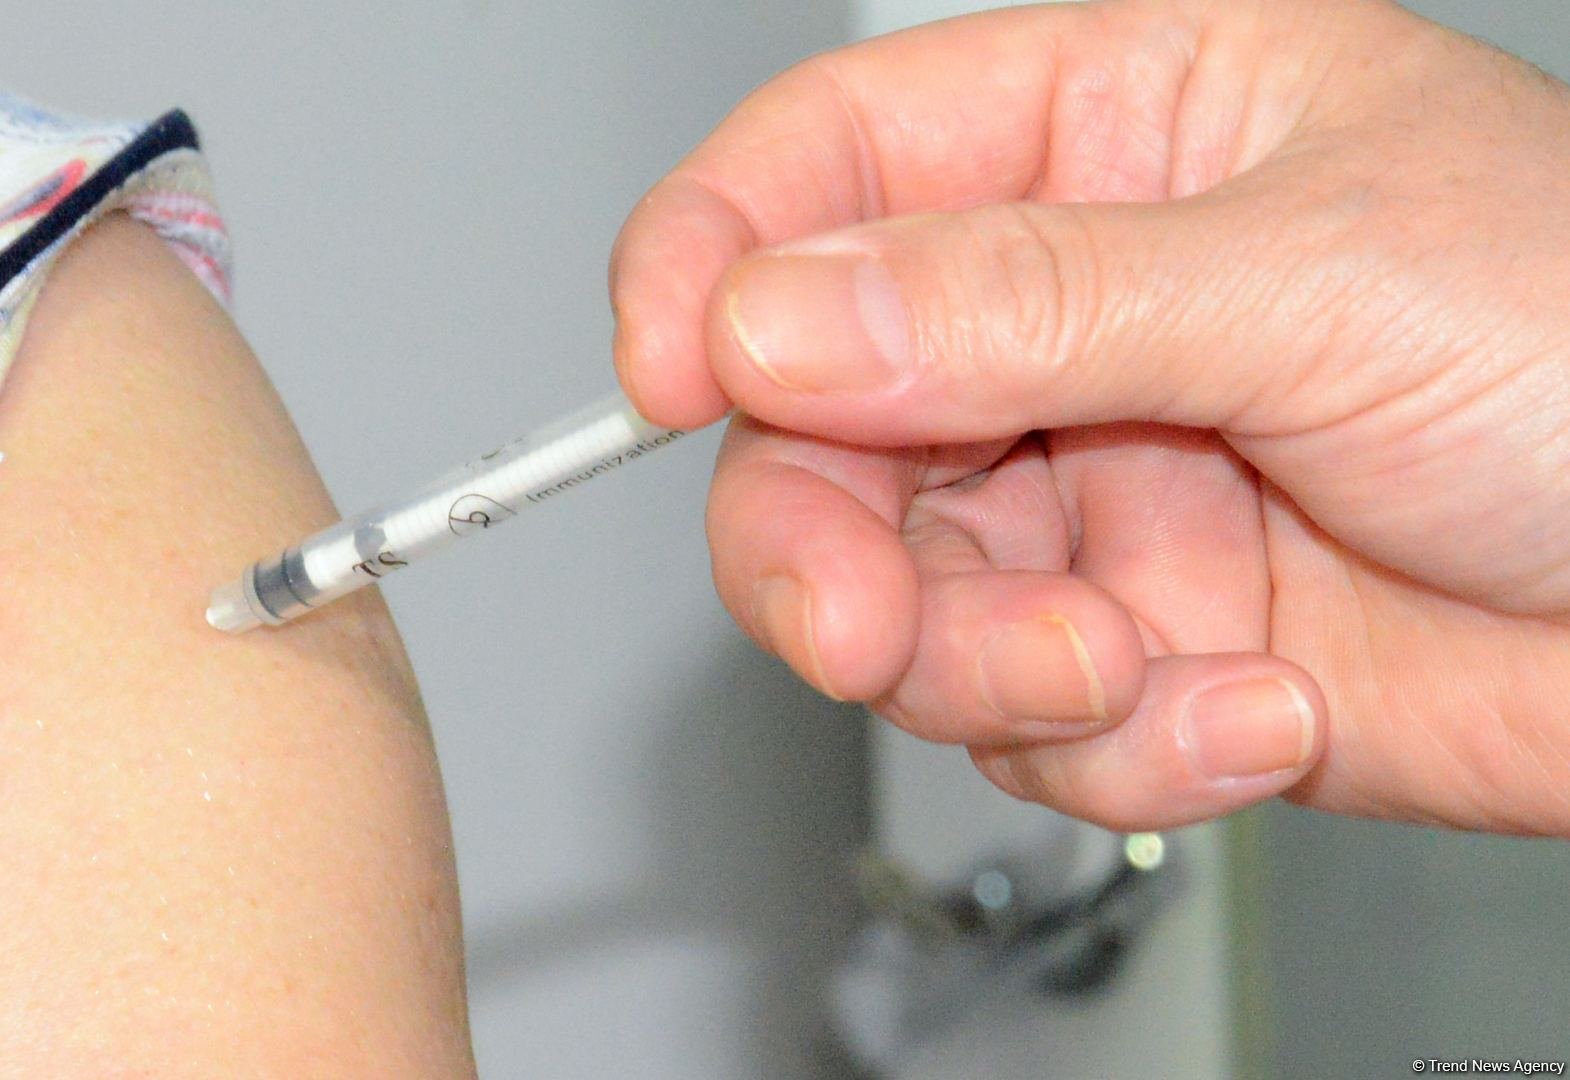 Azerbaijan shares data on number of vaccinated citizens as of January 3